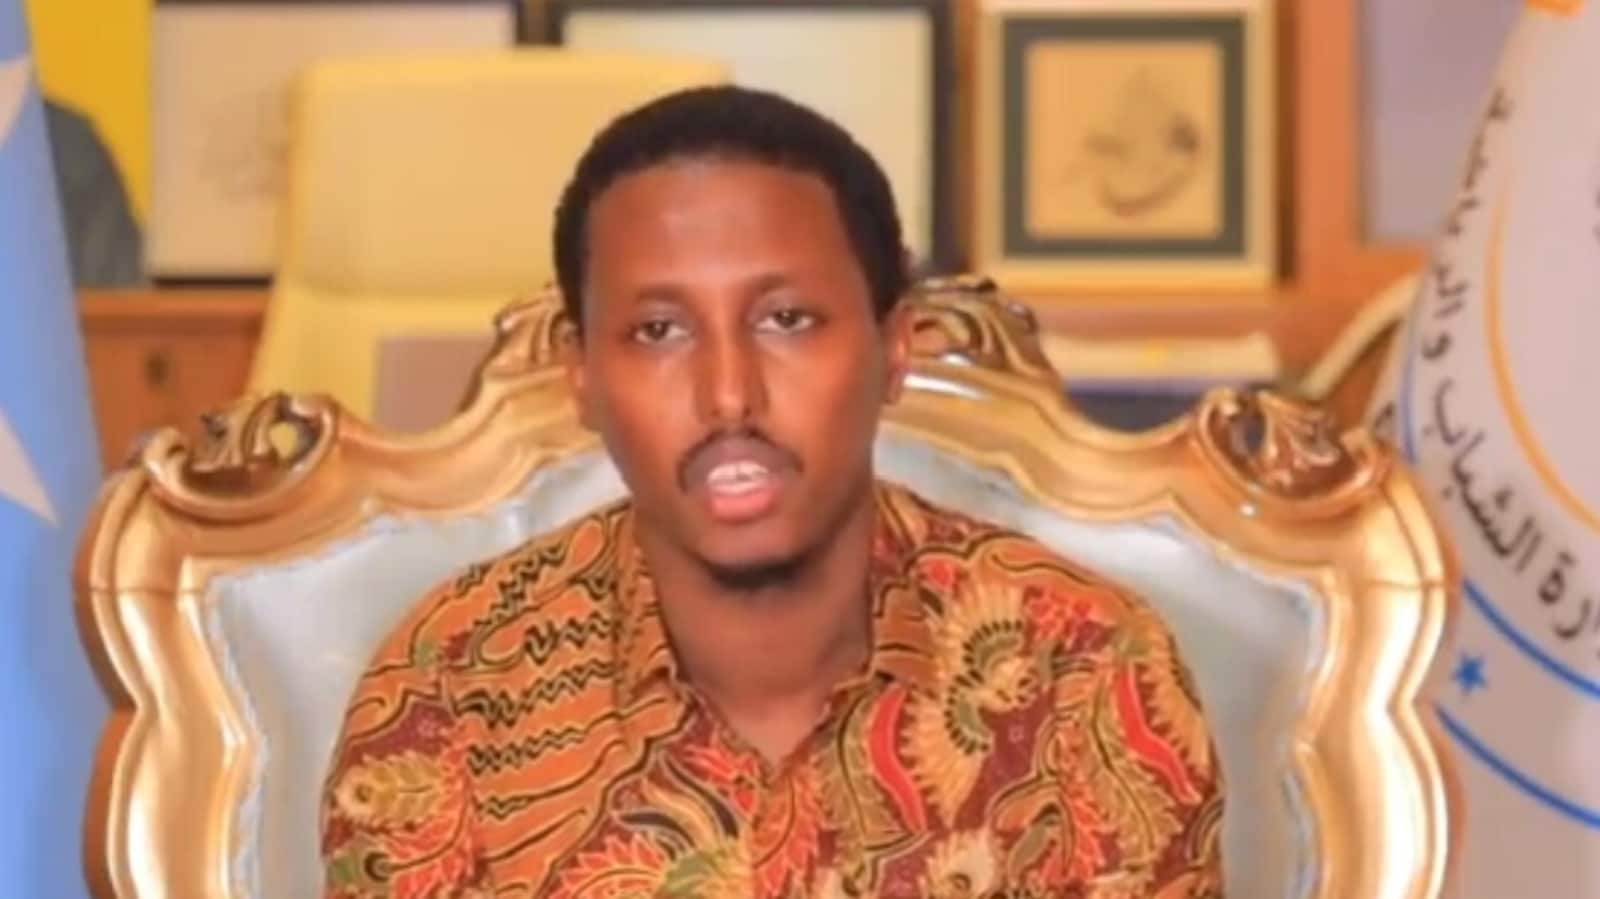 ‘Embarrassing’: Somalia sports minister apologies after ‘slowest ever’ 100m runner goes viral